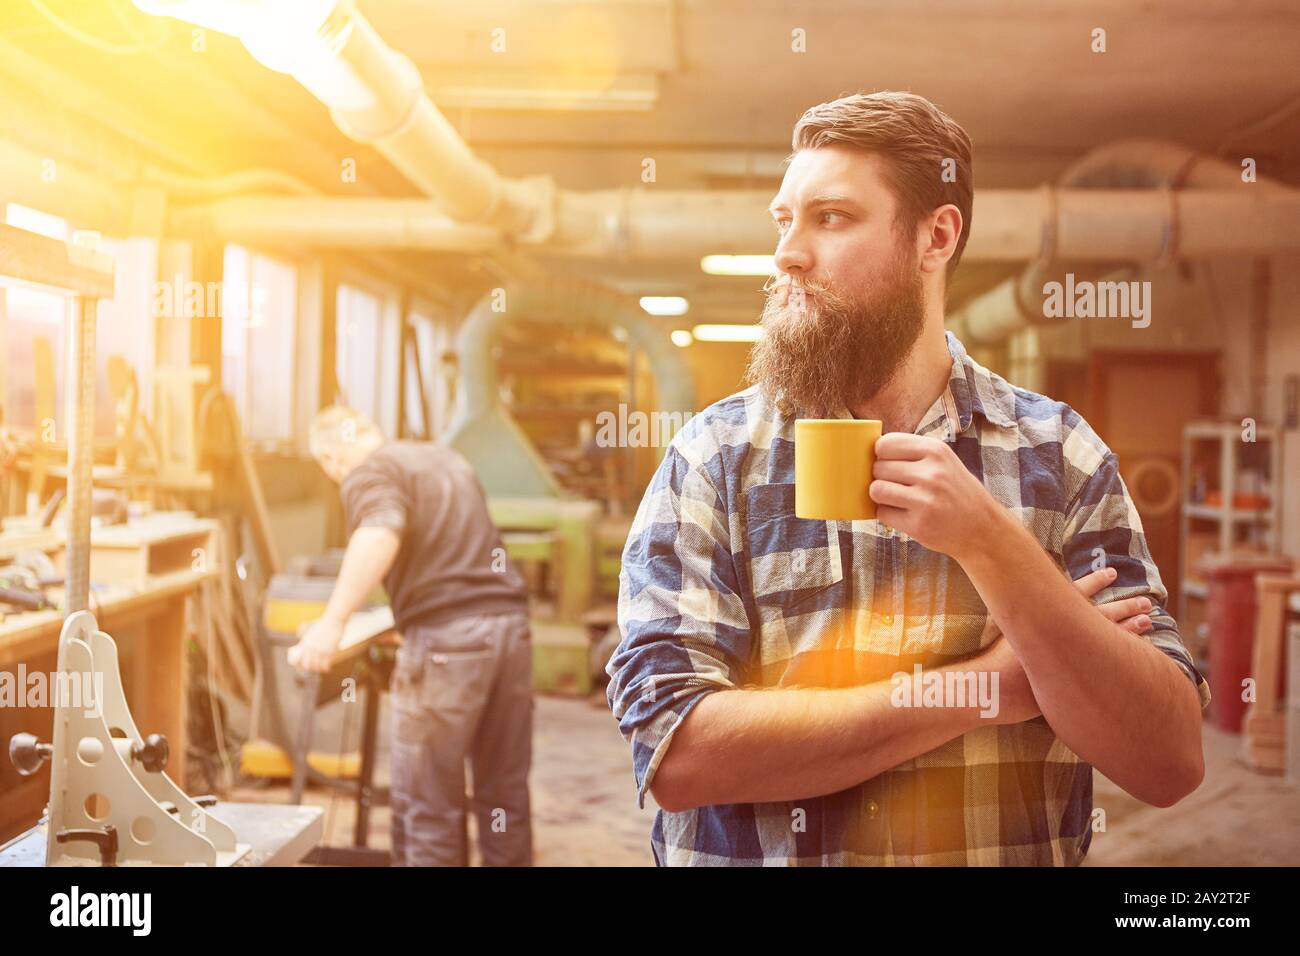 Self-employed hipster carpenter drinking coffee in the workshop Stock Photo